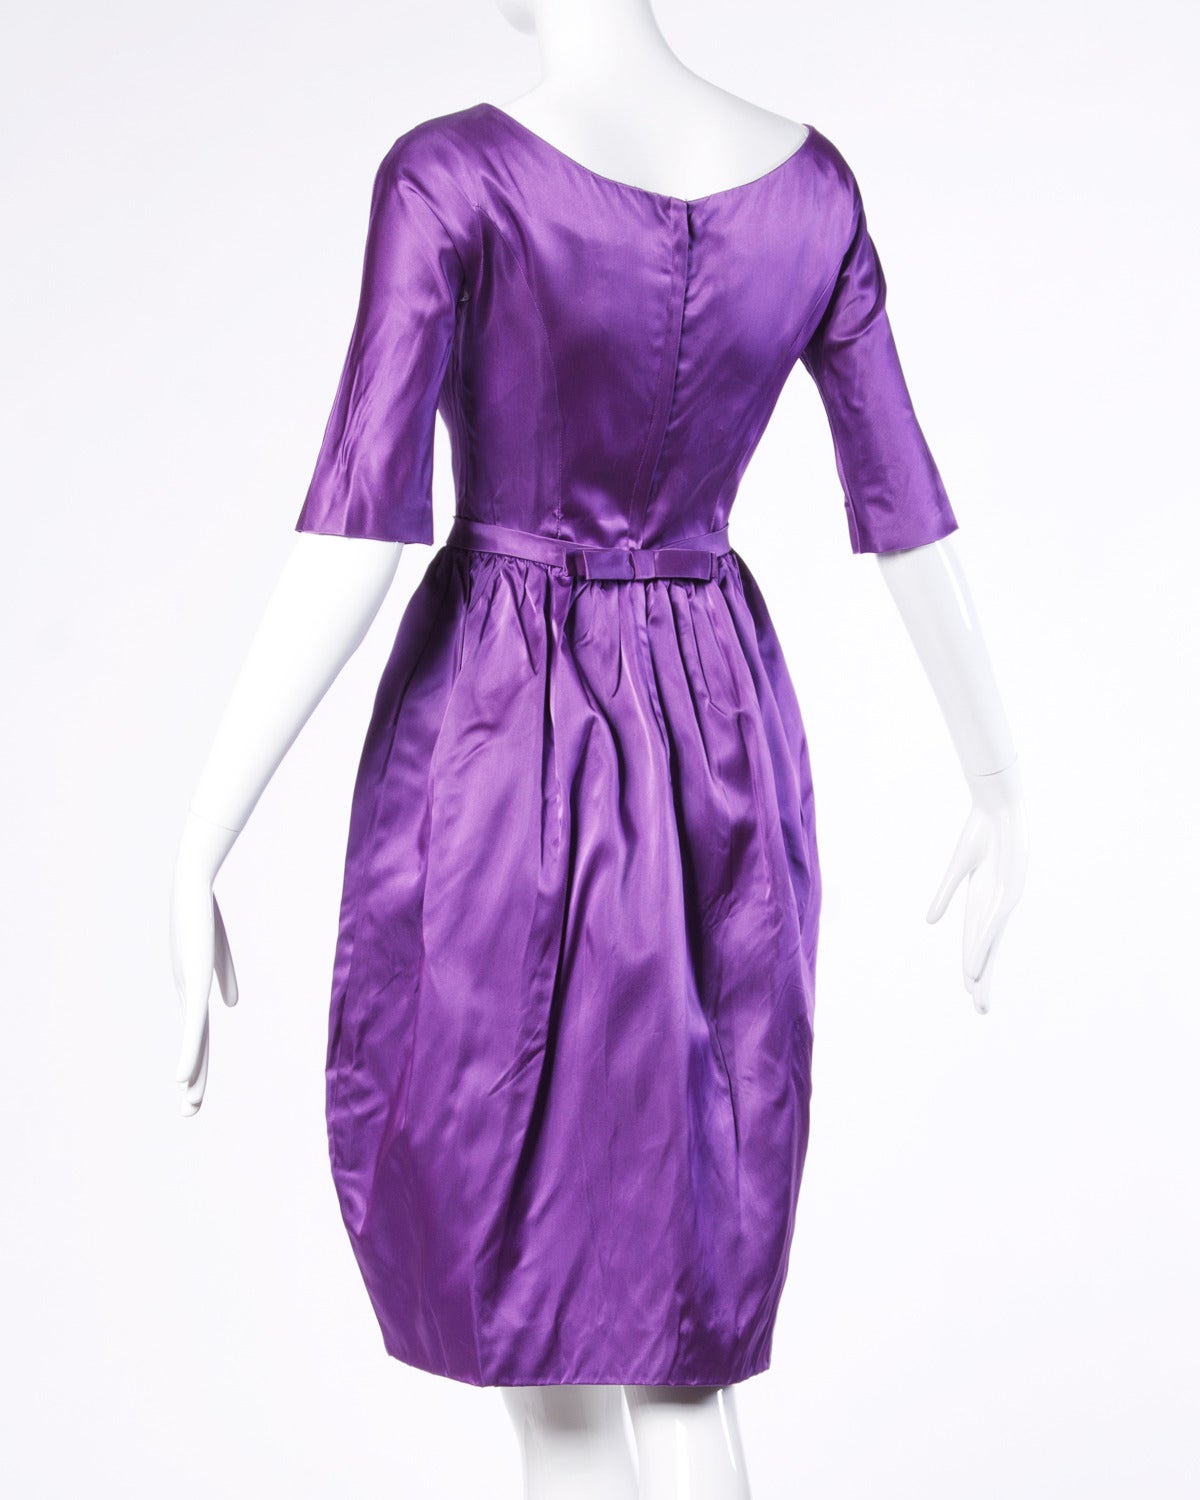 Vintage purple satin cocktail dress with 3/4 length sleeves and a tiny nipped waist.

Details:

Estimated Size: XS
Partially Lined
Back Metal Zip Snap and Hook Closure
Color: Purple
Fabric: Satin

Measurements:

Bust: 32